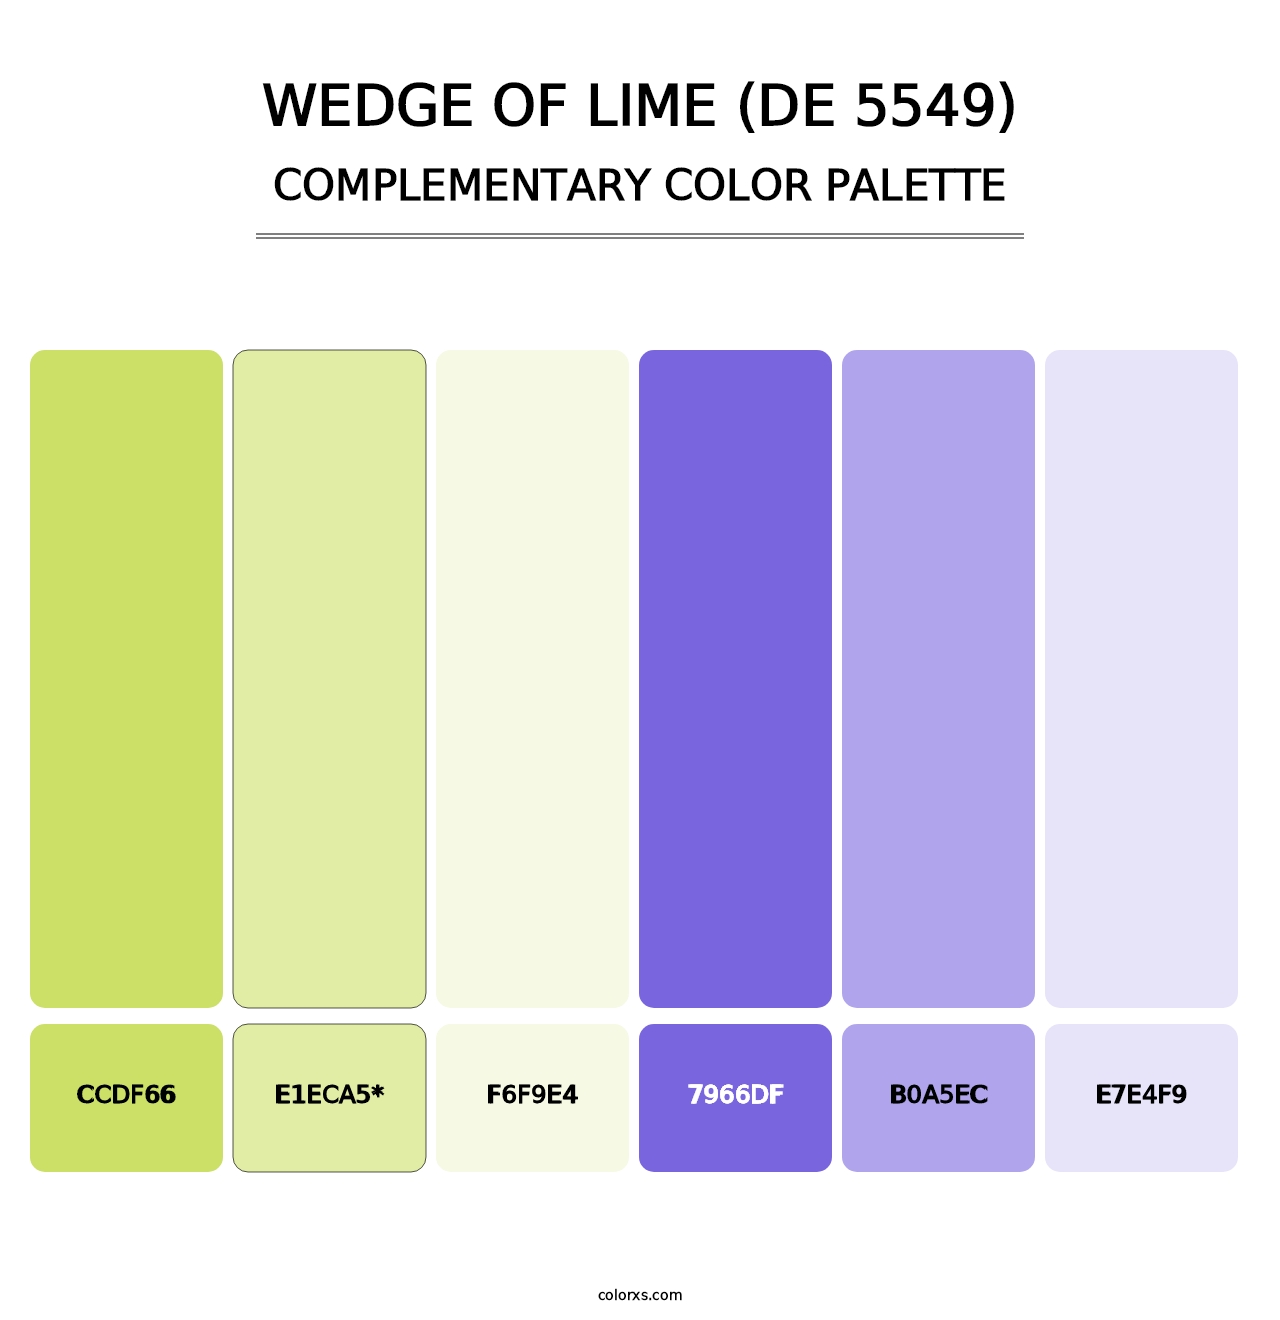 Wedge of Lime (DE 5549) - Complementary Color Palette